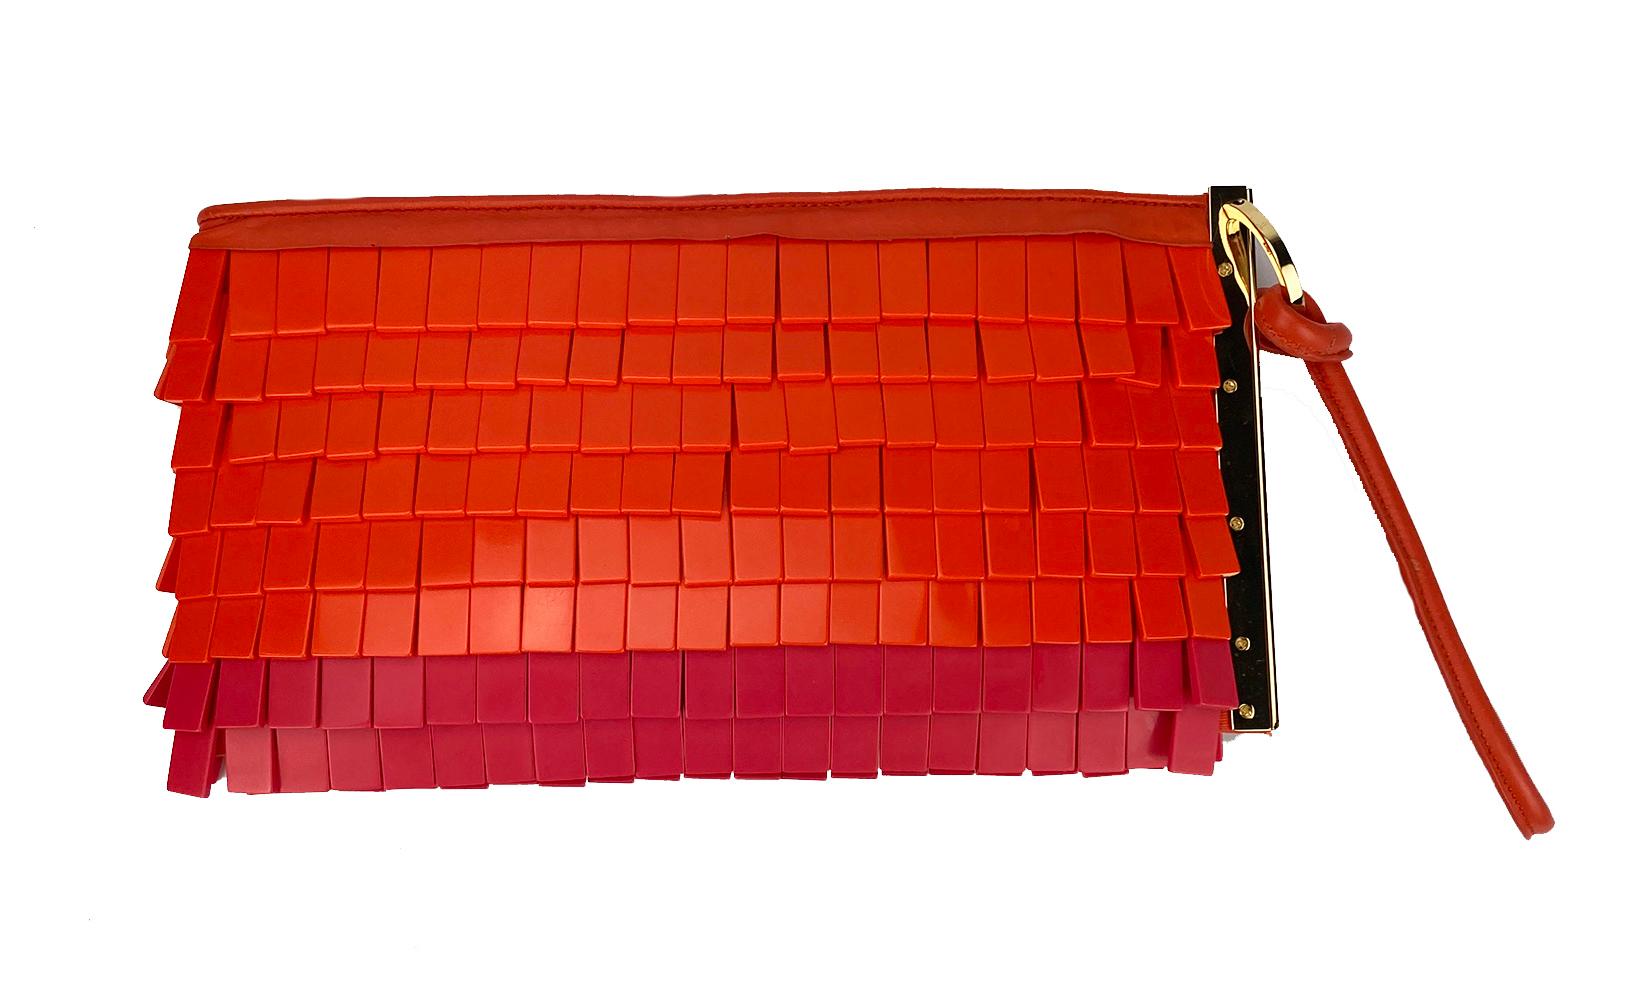 Herve Leger Orange and Pink Acrylic Chip Fringe Clutch in excellent condition. Unique Orange and Pink acrylic small rectangle beads throughout exterior trimmed with pink leather and gold hardware. Leather wrist strap. Engraved hardware. Top zipper